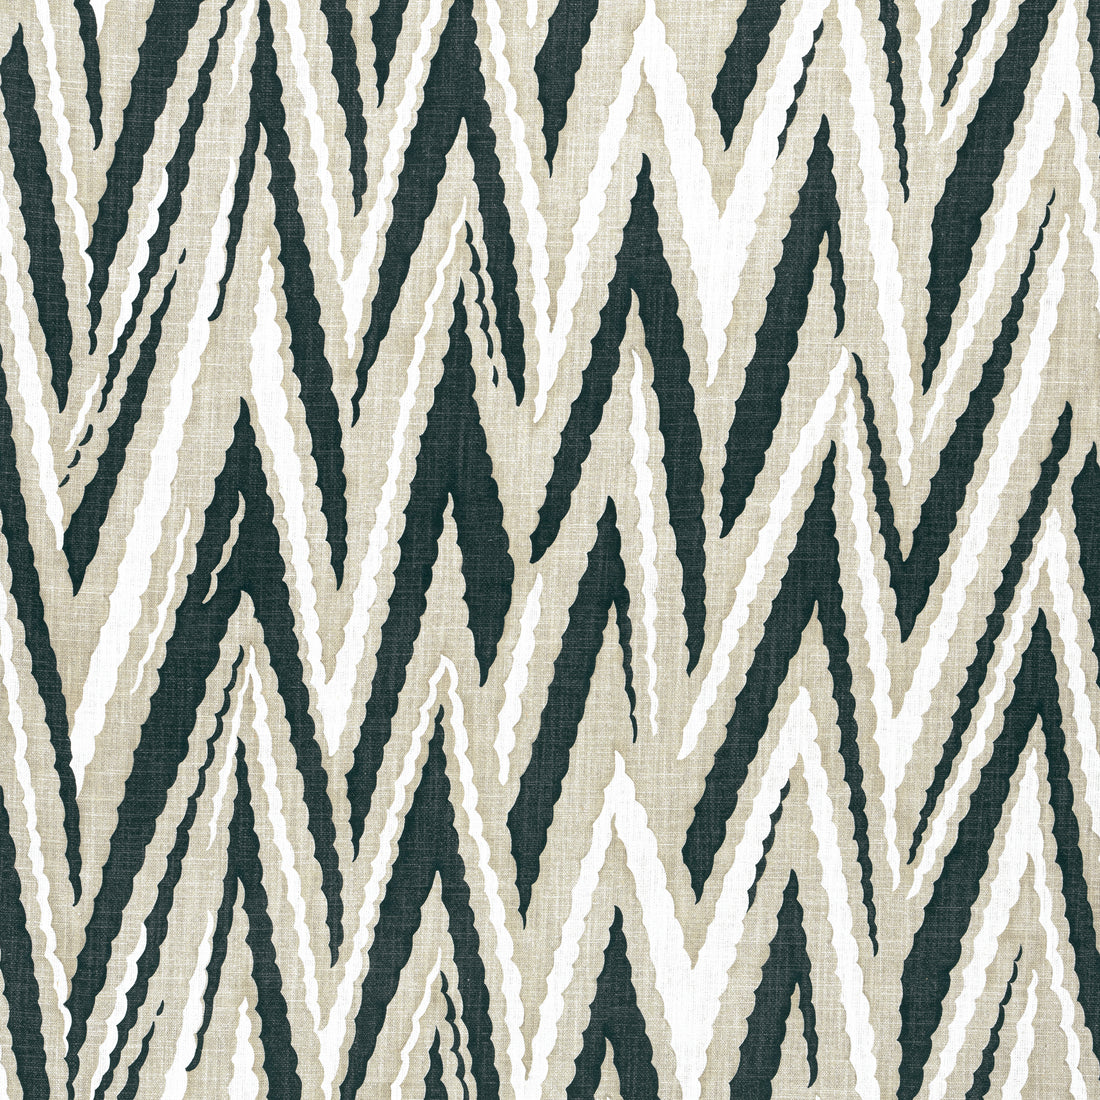 Highland Peak fabric in black color - pattern number AF23139 - by Anna French in the Willow Tree collection